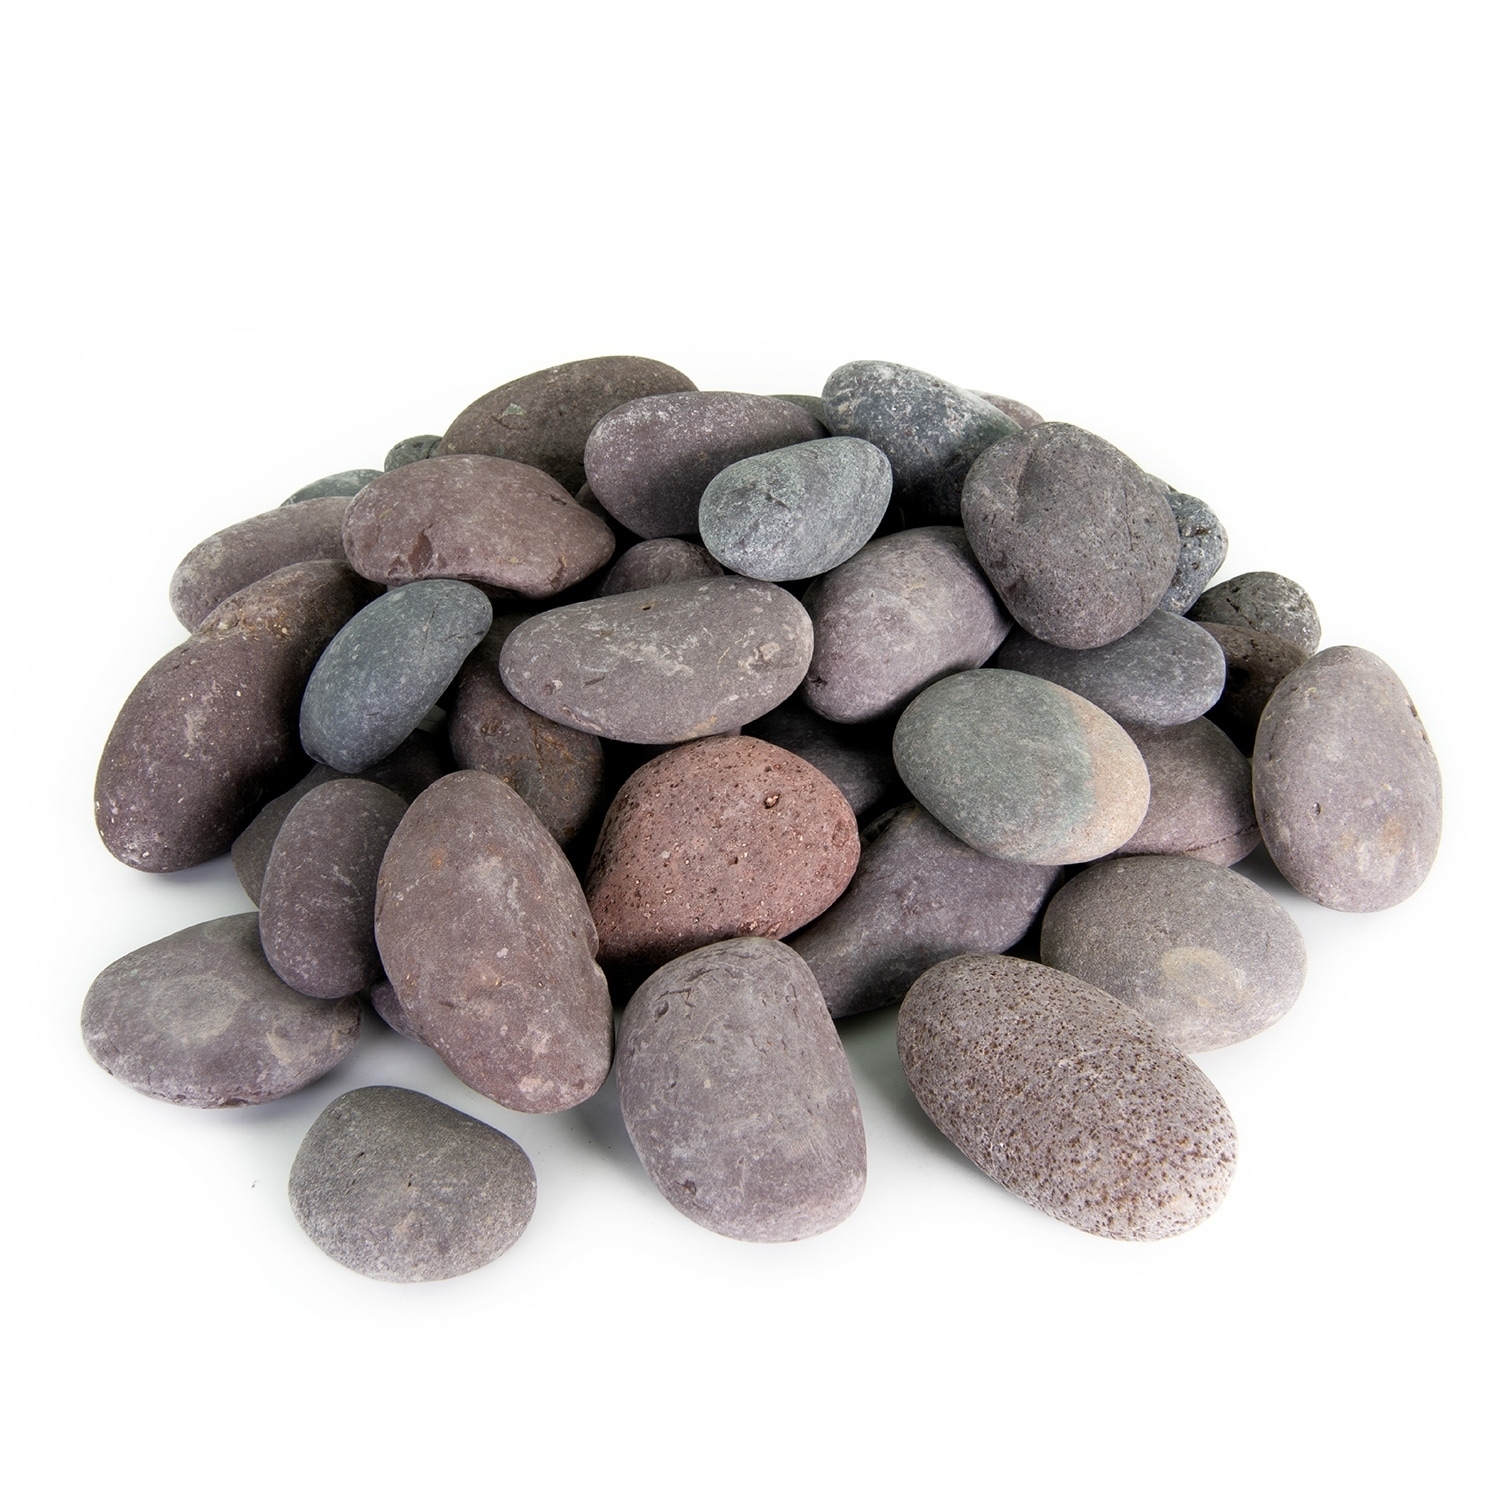 Details about   20 lb Grey Mexican Beach Pebbles Decorative Smooth Stones Gardens Landscaping